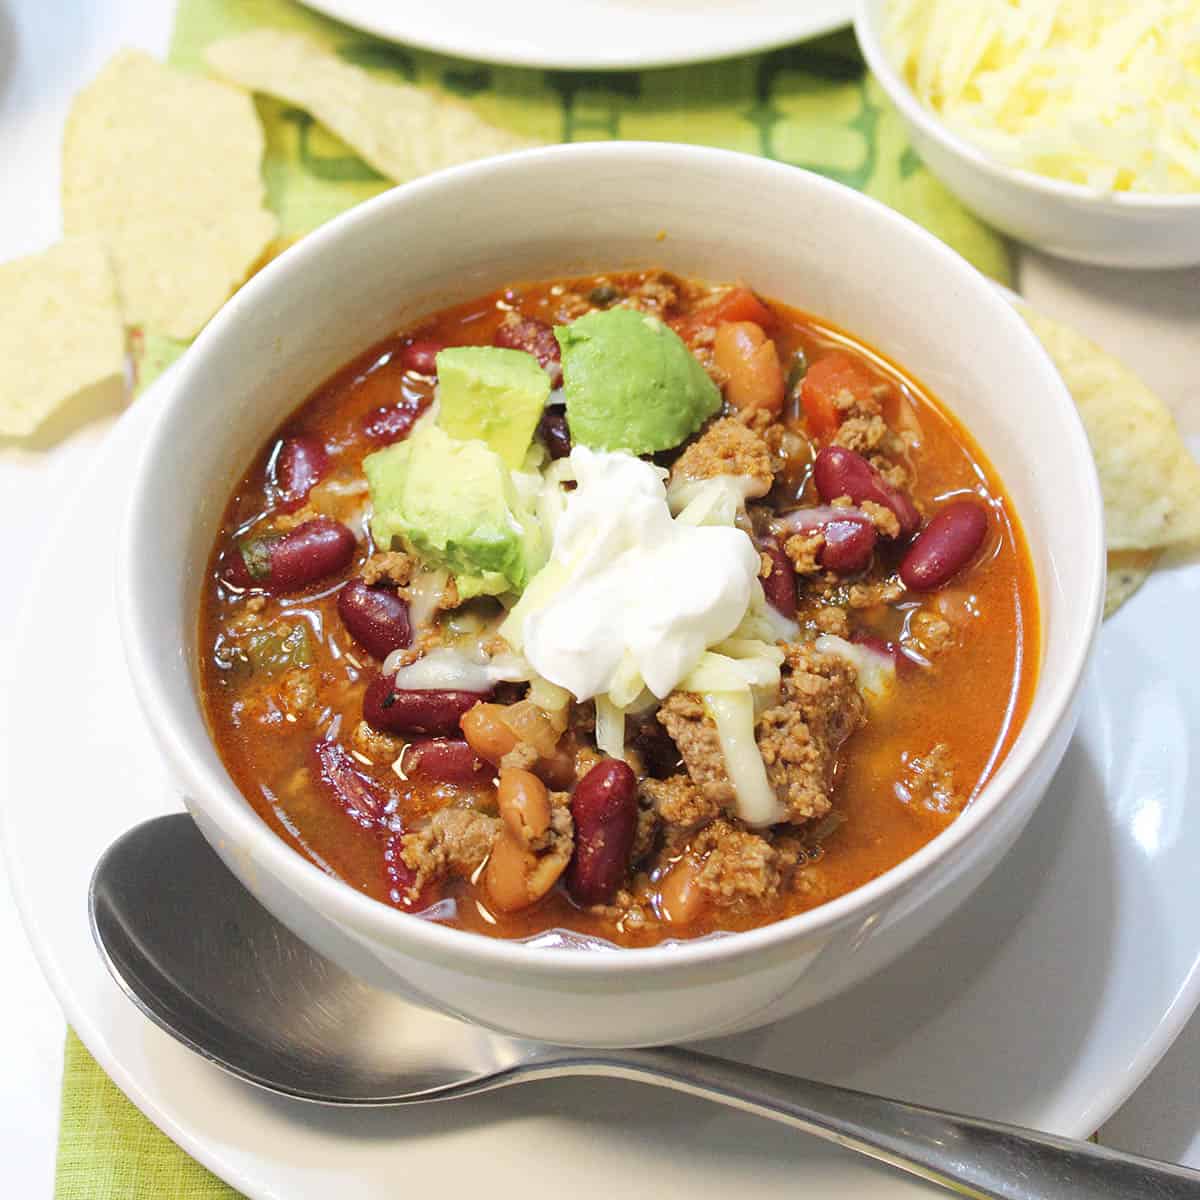 Bowl of chili on white table garnished with sour cream and avocado.